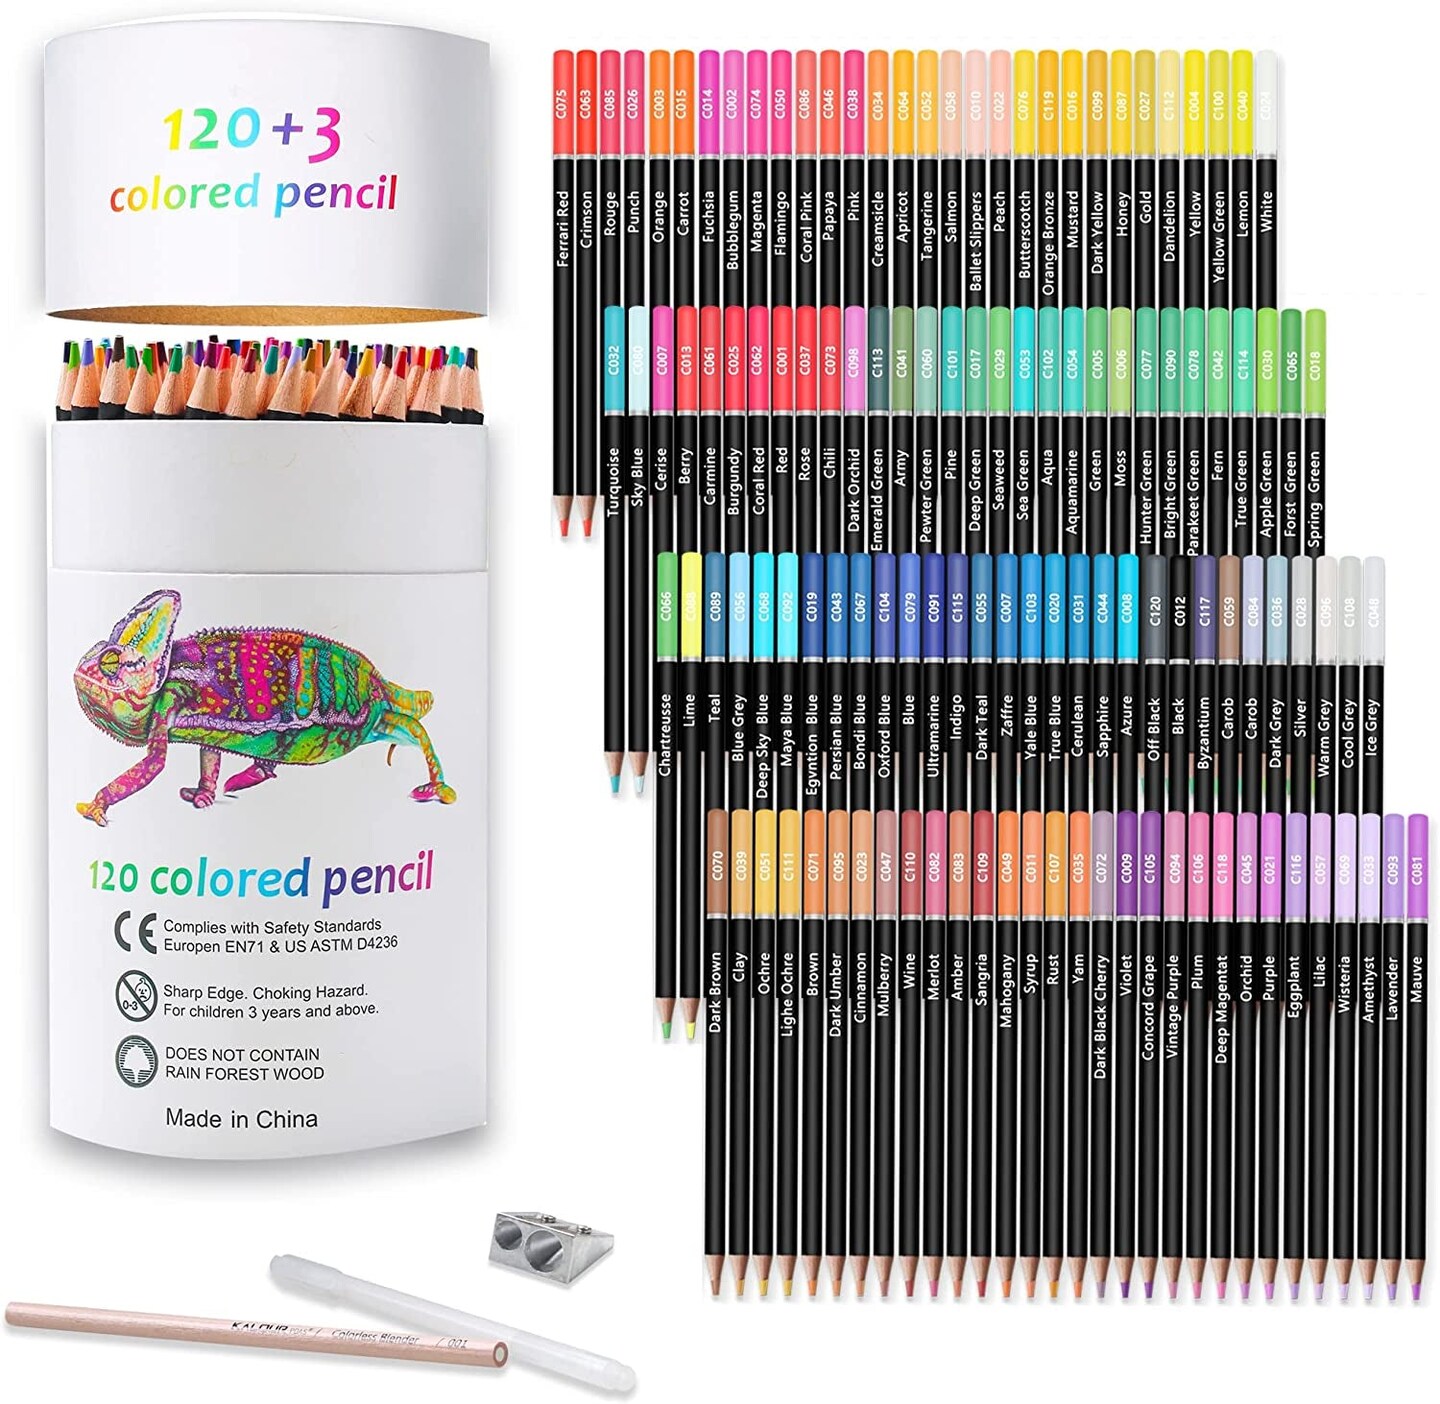 Colored Pencils for Adult Coloring Books, Soft Core, Artist Sketching  Drawing Pencils Art Craft Supplies, Coloring Pencils